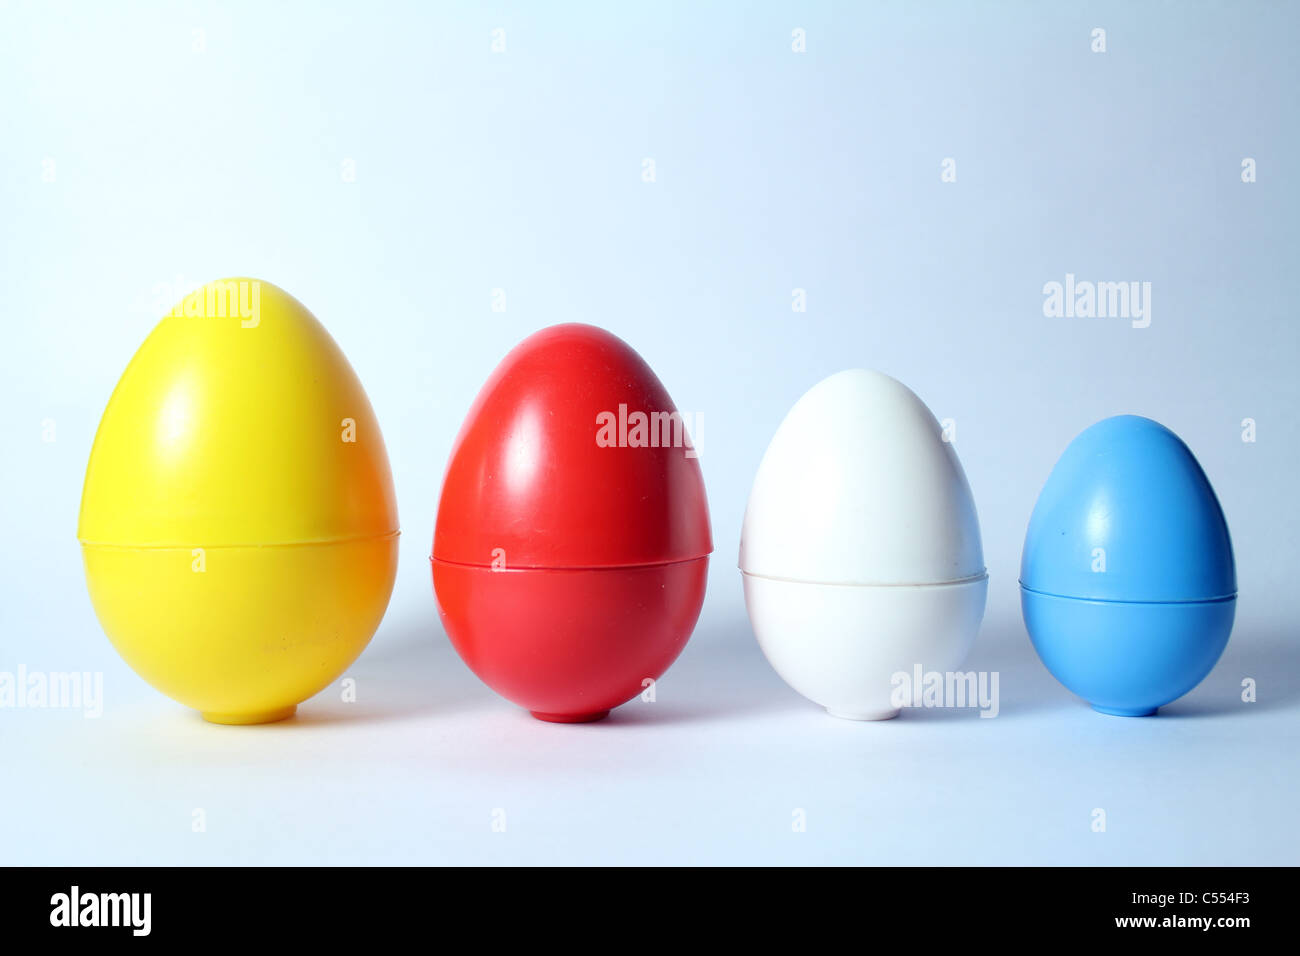 Conceptual shot of plastic eggs in different sizes Stock Photo